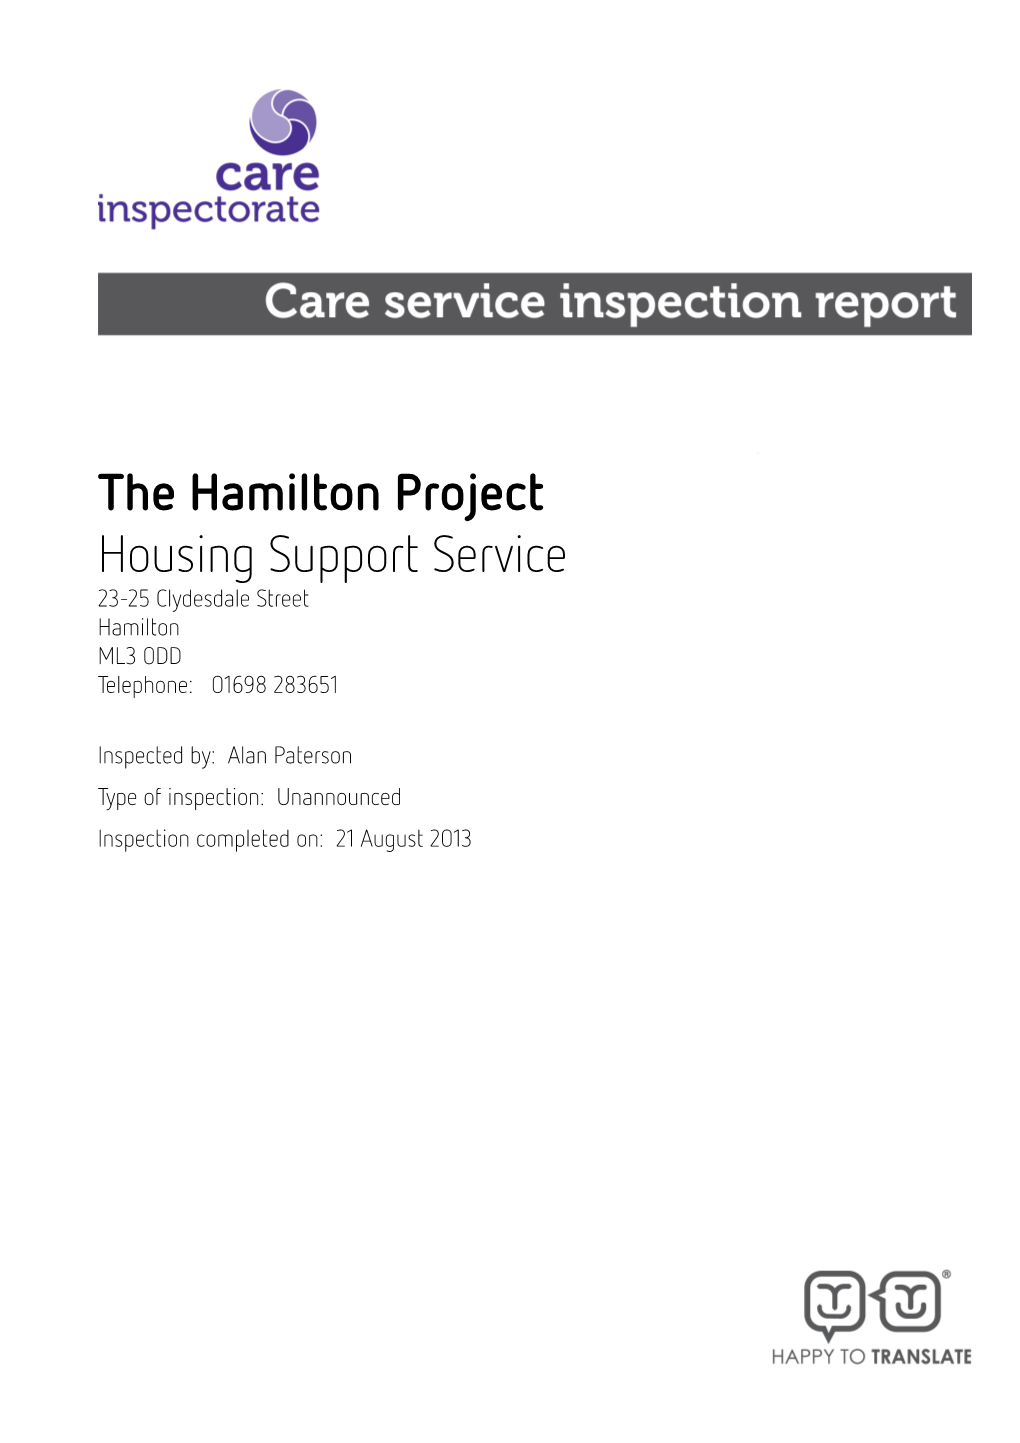 The Hamilton Project Housing Support Service 23-25 Clydesdale Street Hamilton ML3 0DD Telephone: 01698 283651